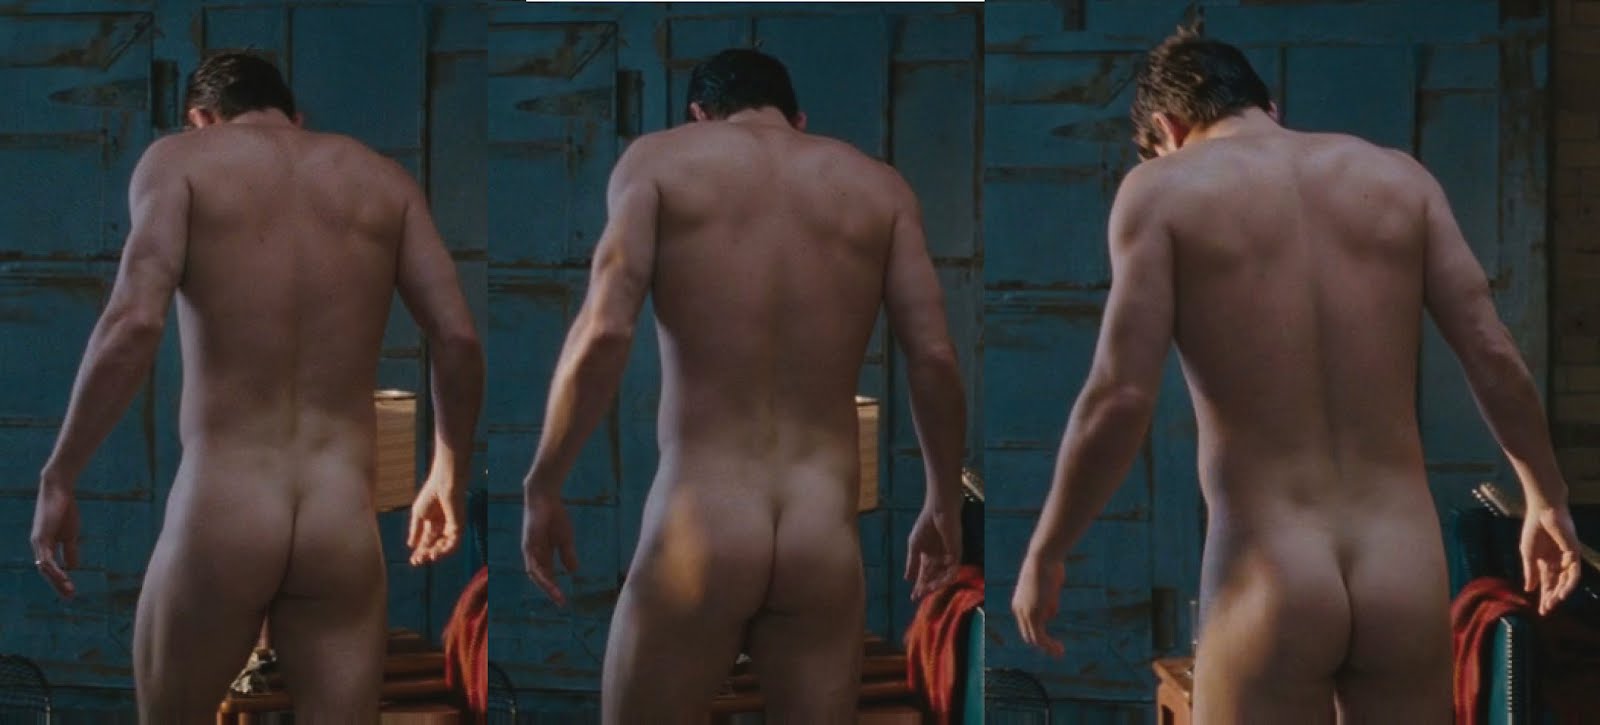 Great actor and handsome young man Channing Tatum demonstrating his attract...